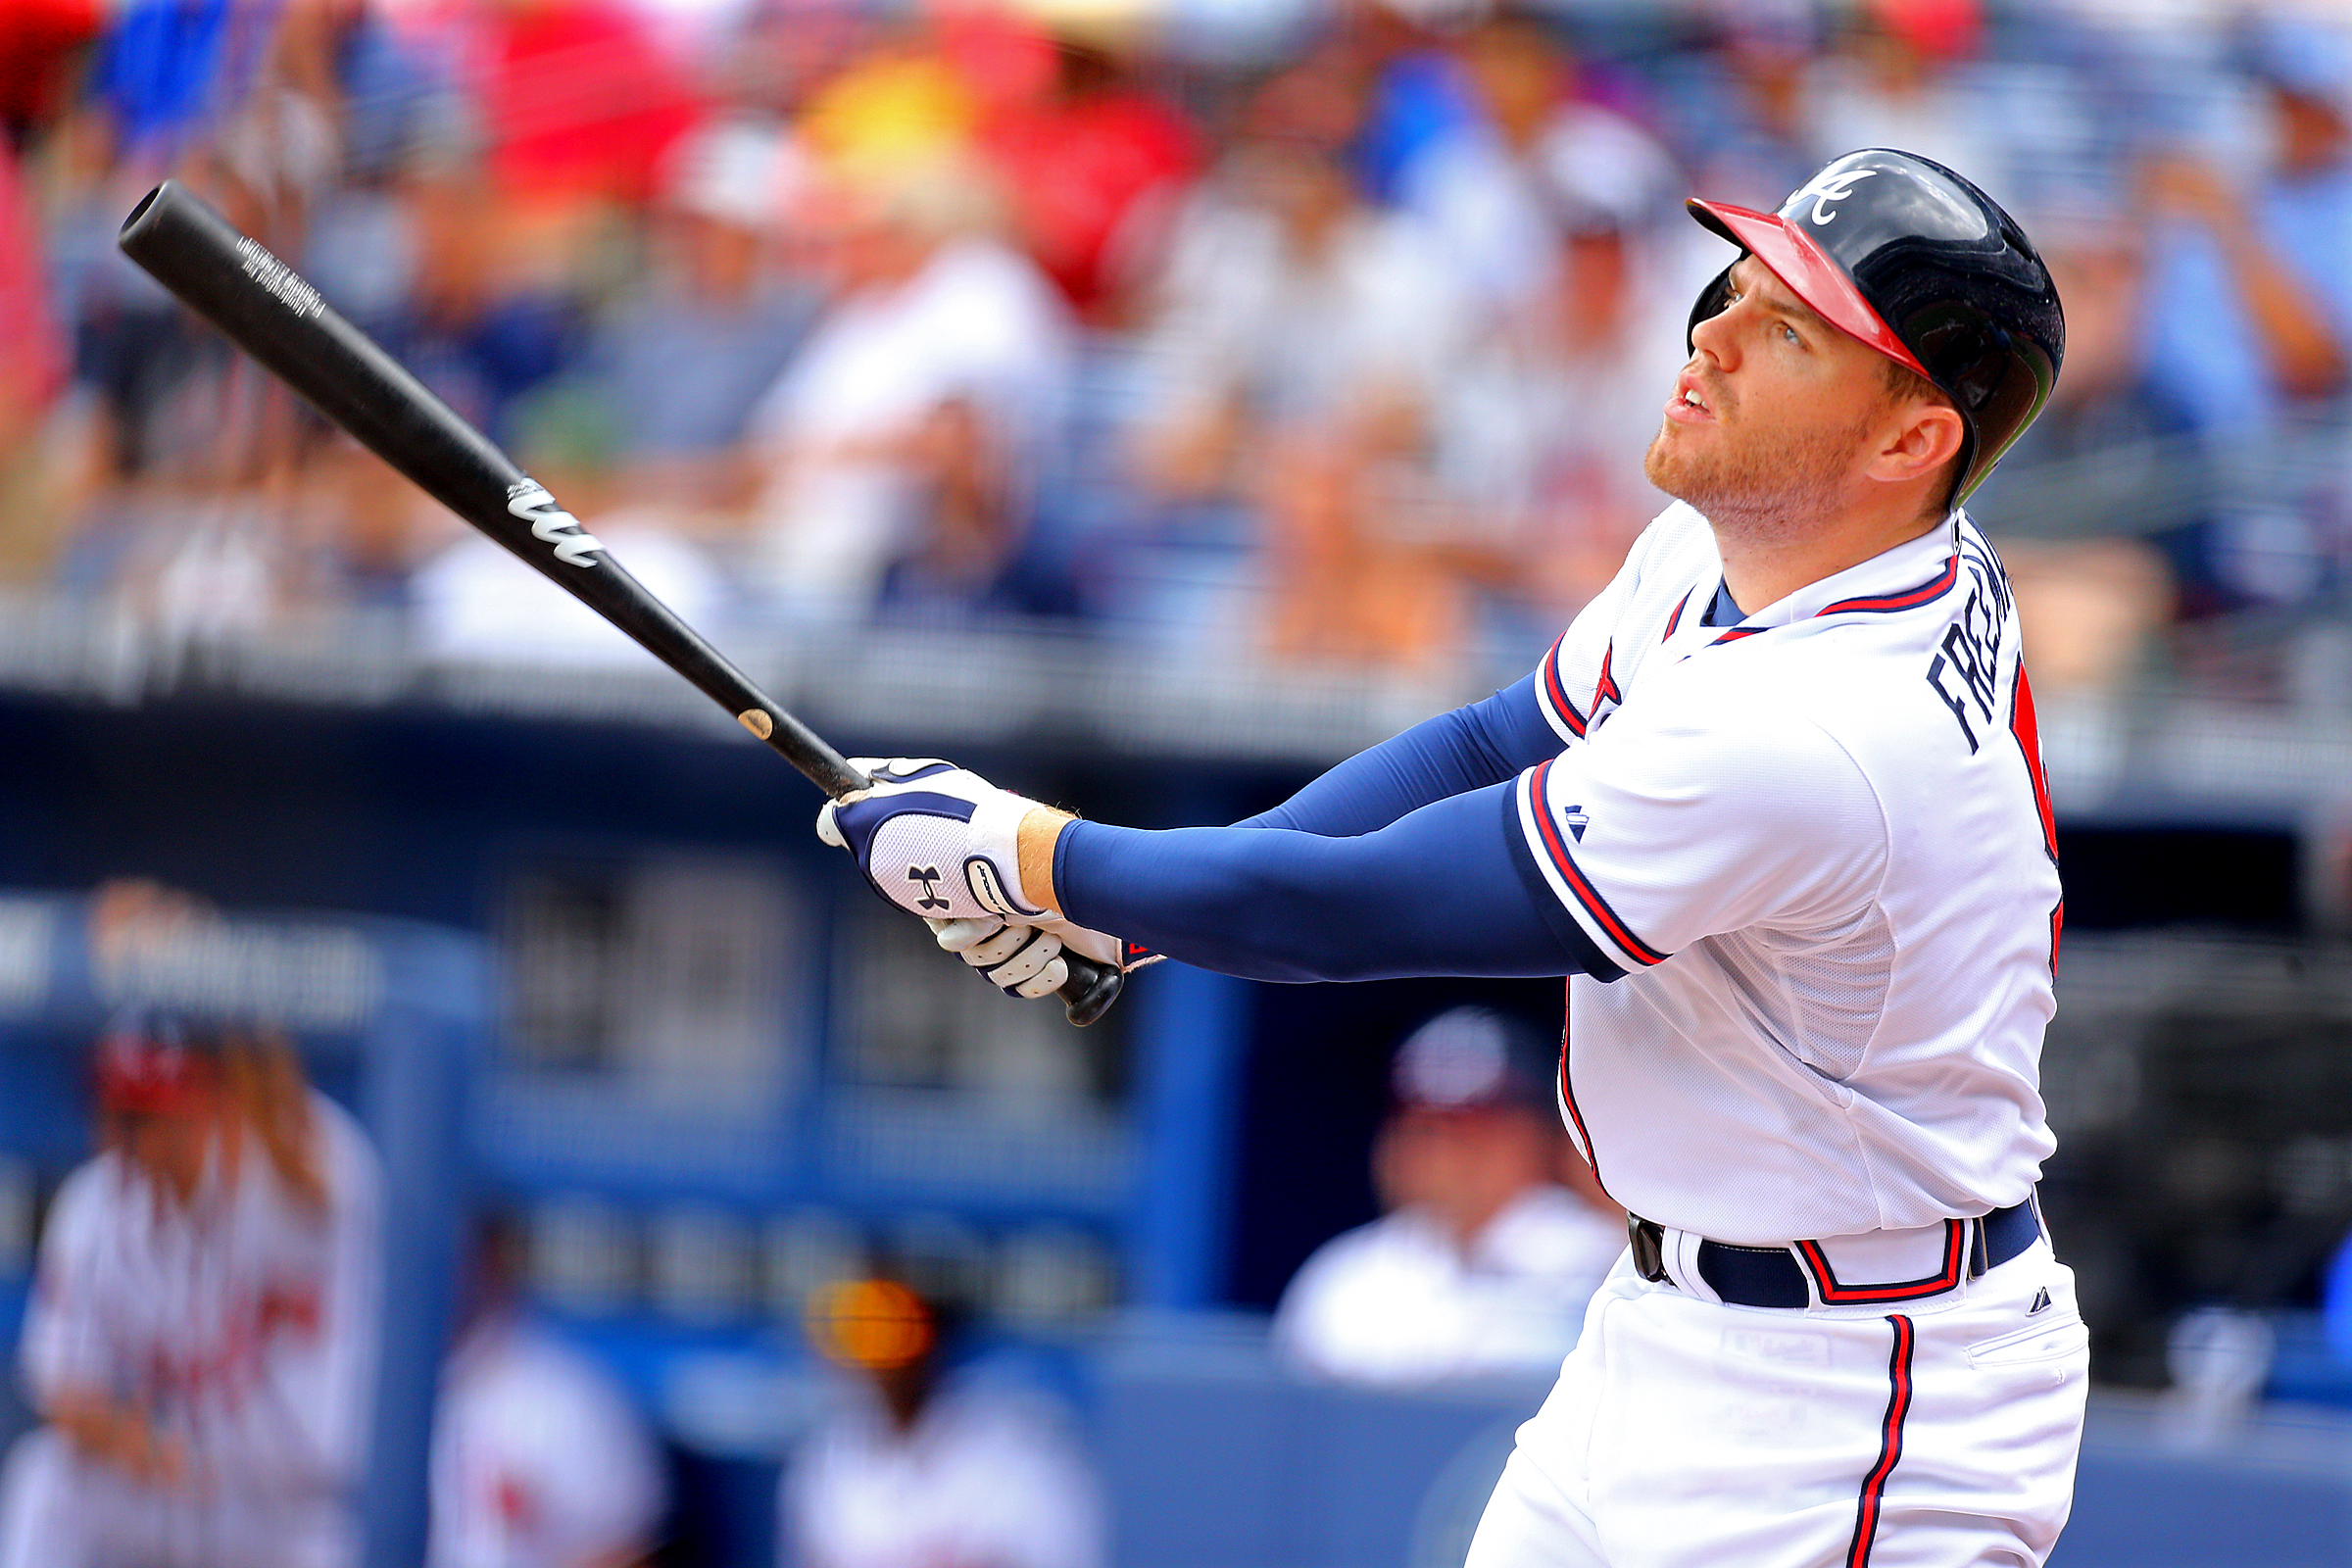 Braves Star Freddie Freeman's Son Goes Viral With Perfect Swing